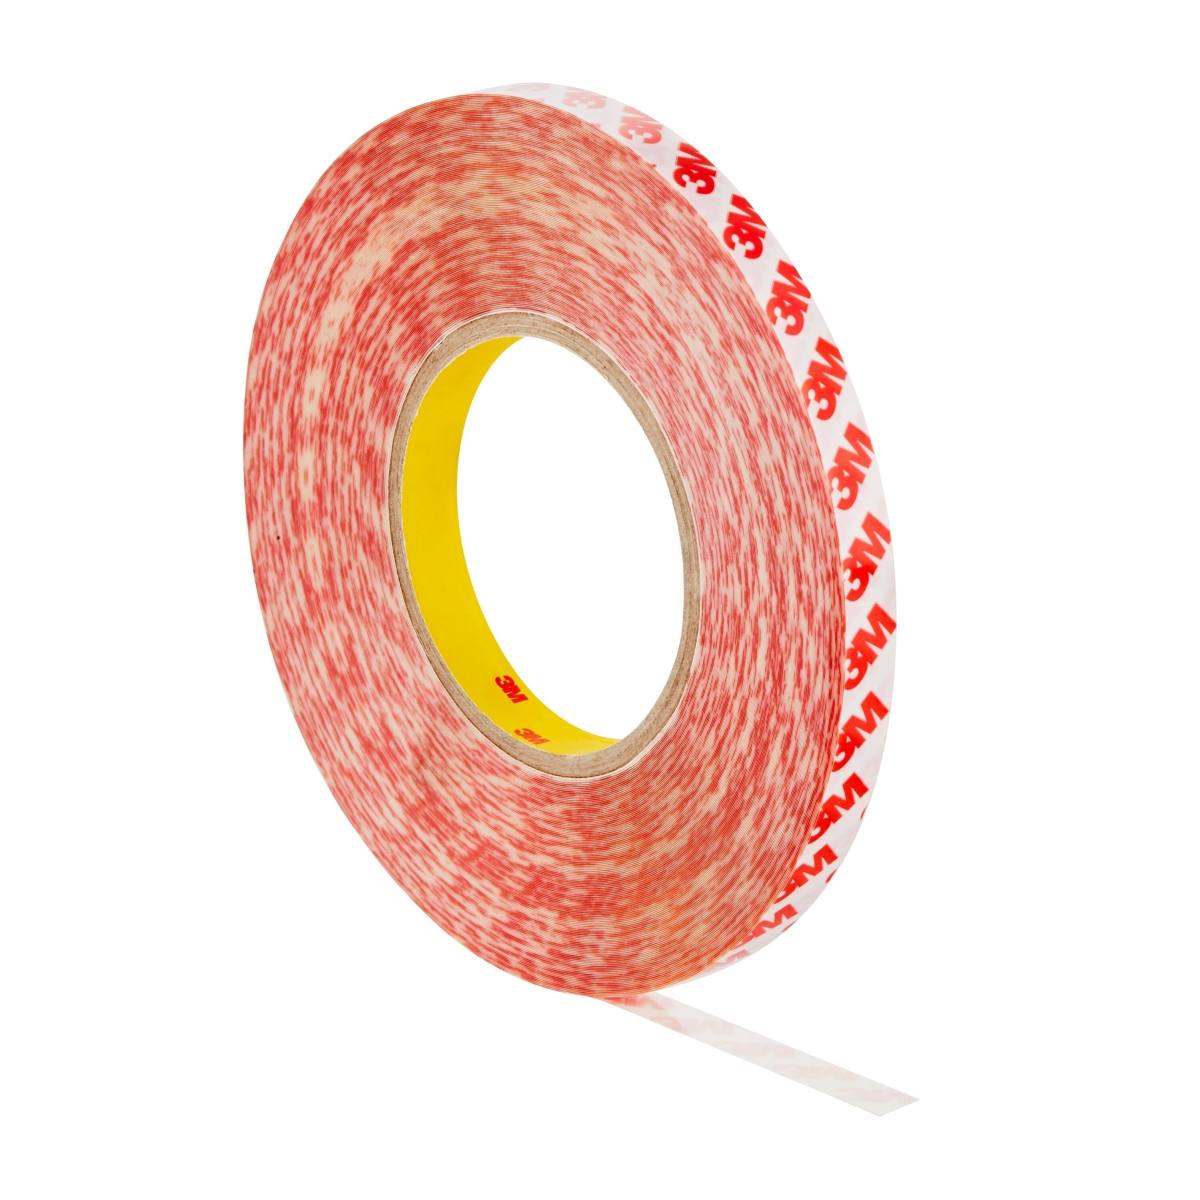 3M Double-sided adhesive tape with polyester backing GPT-020P, transparent, 25 mm x 50 m, 0.202 mm